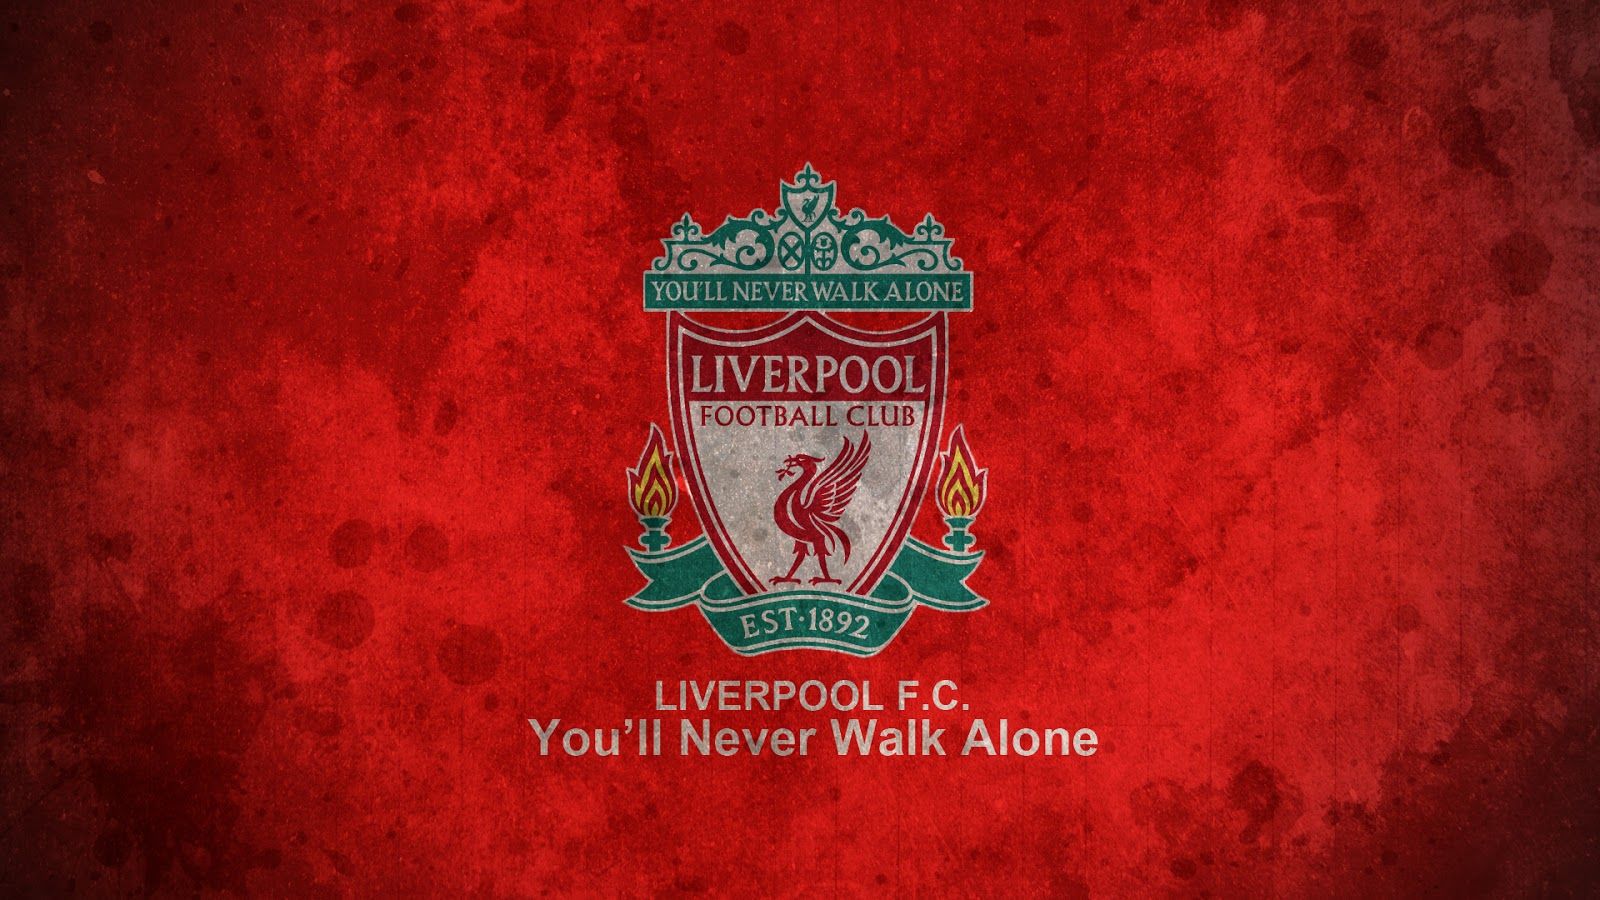 Liverpool fc hd logo wallapapers for desktop collection